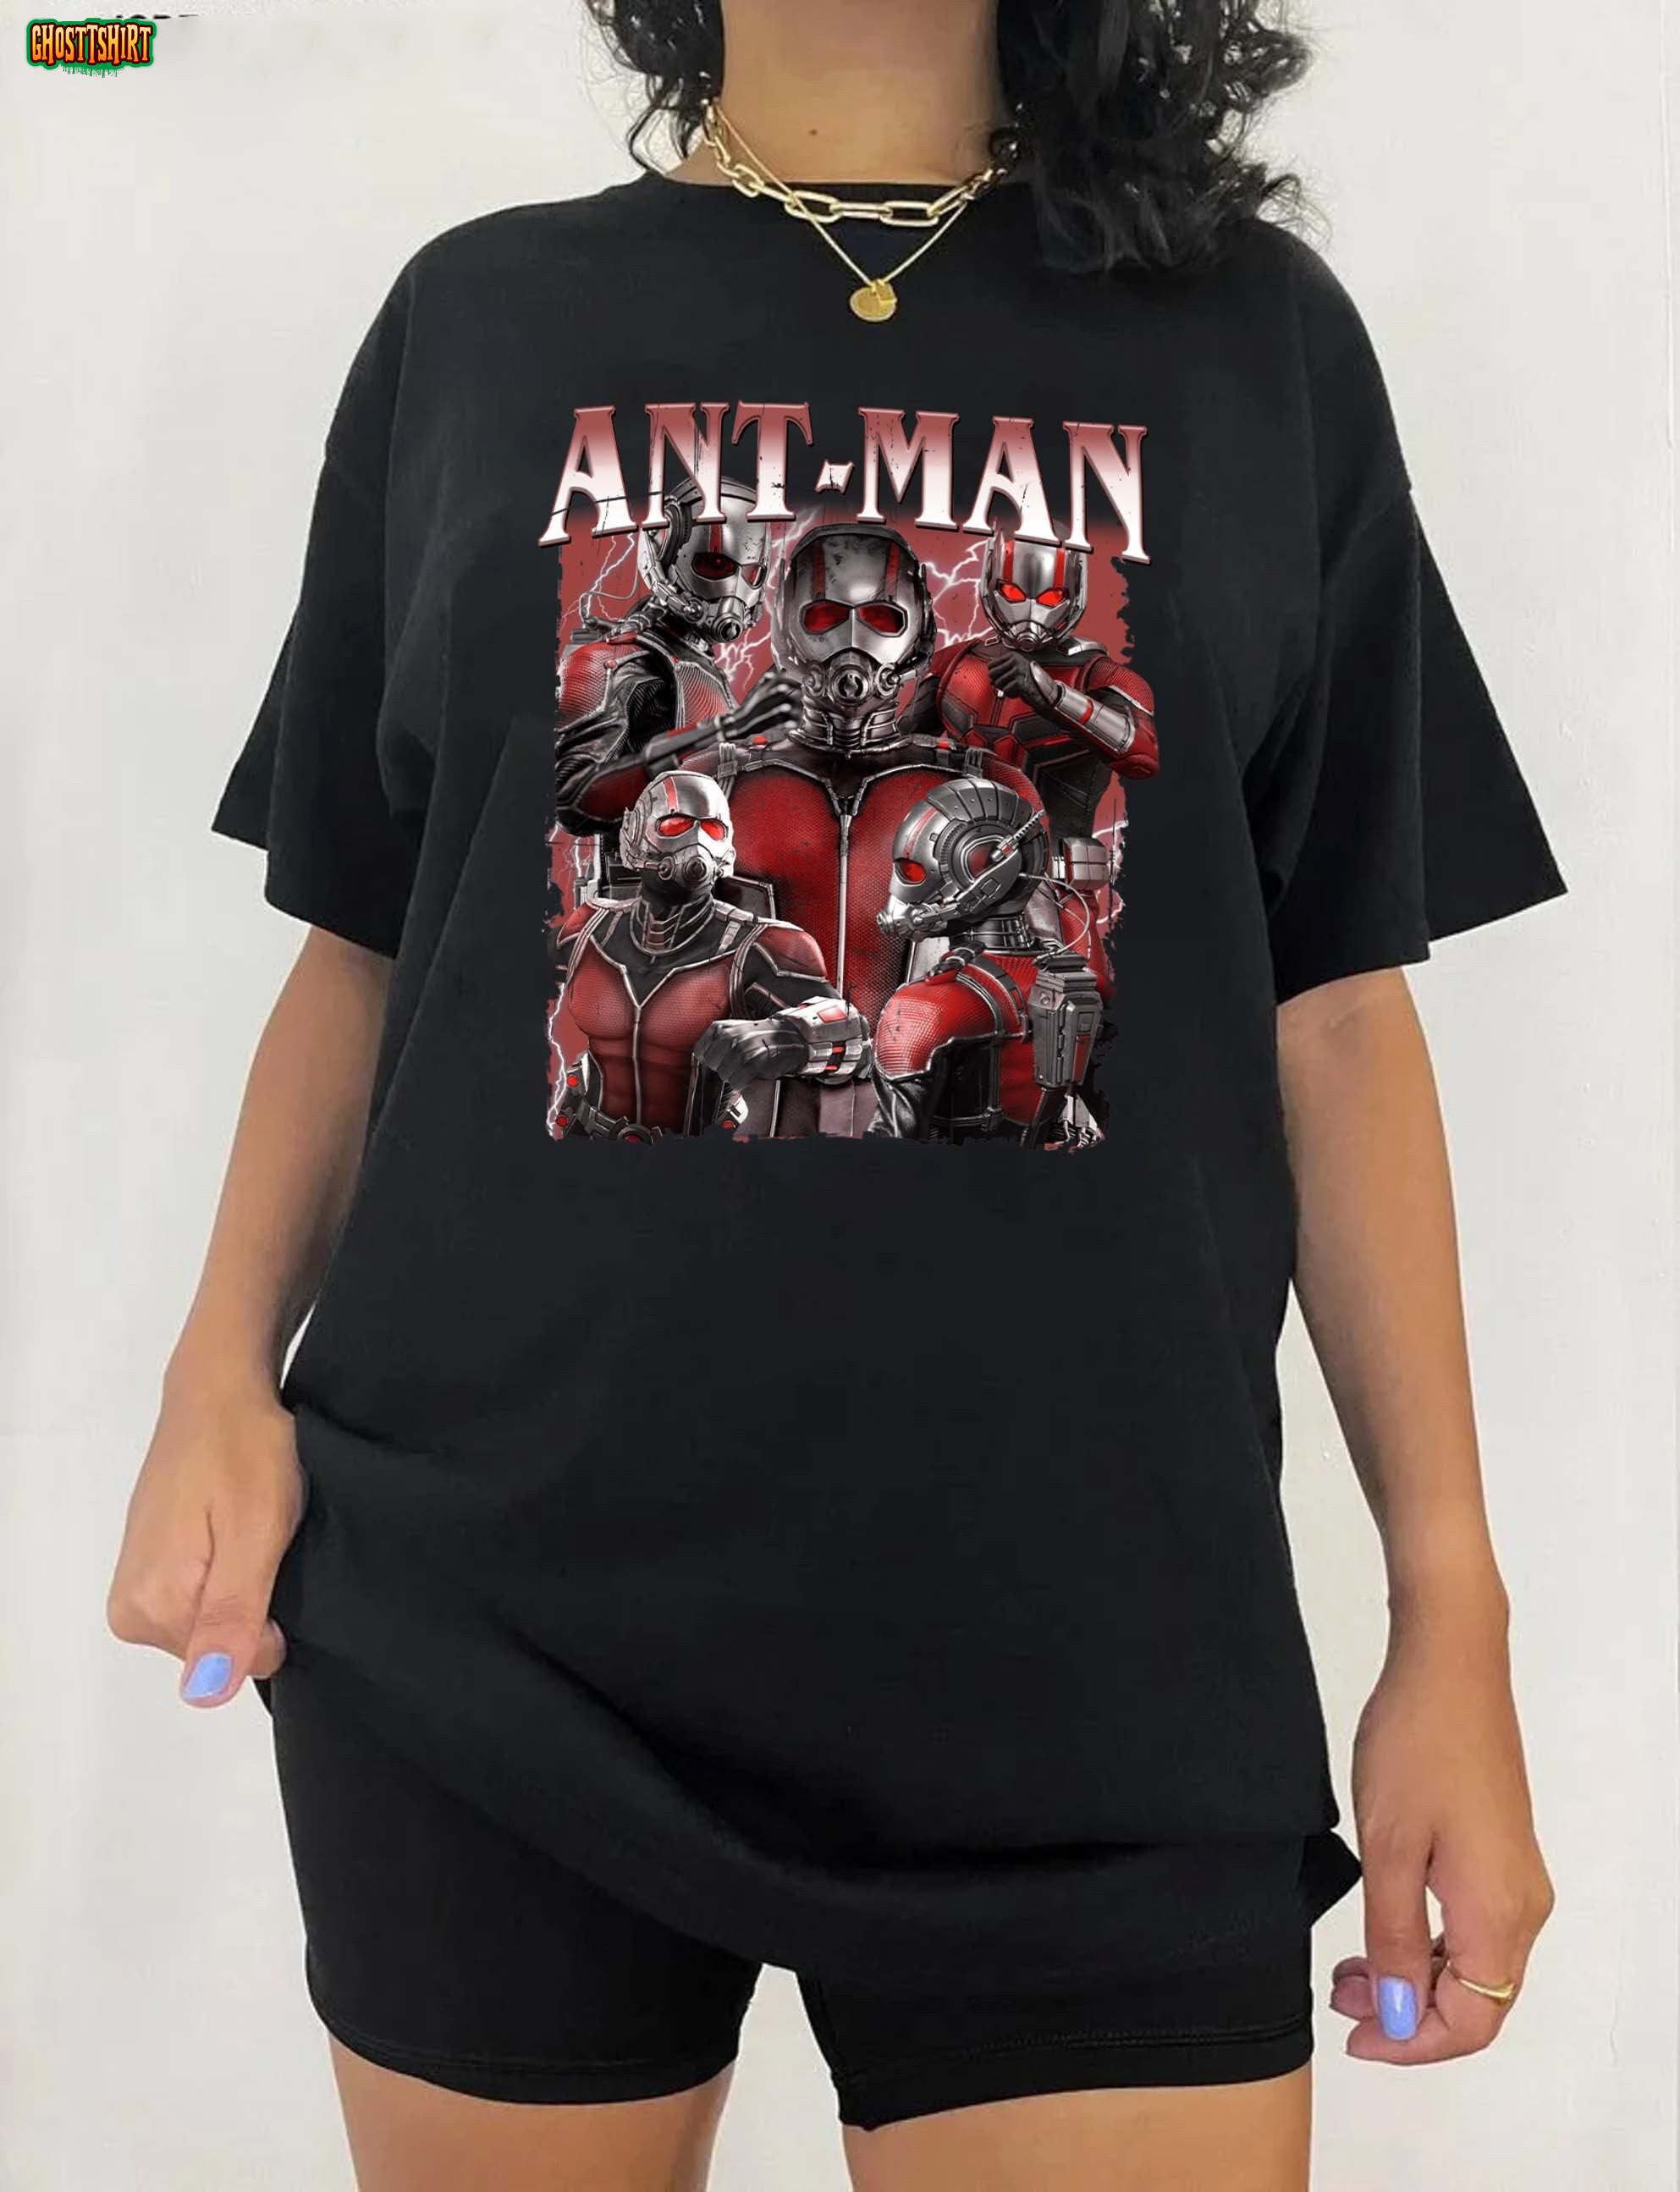 Ant-Man and The Wasp Quantumania 2023 T-Shirt